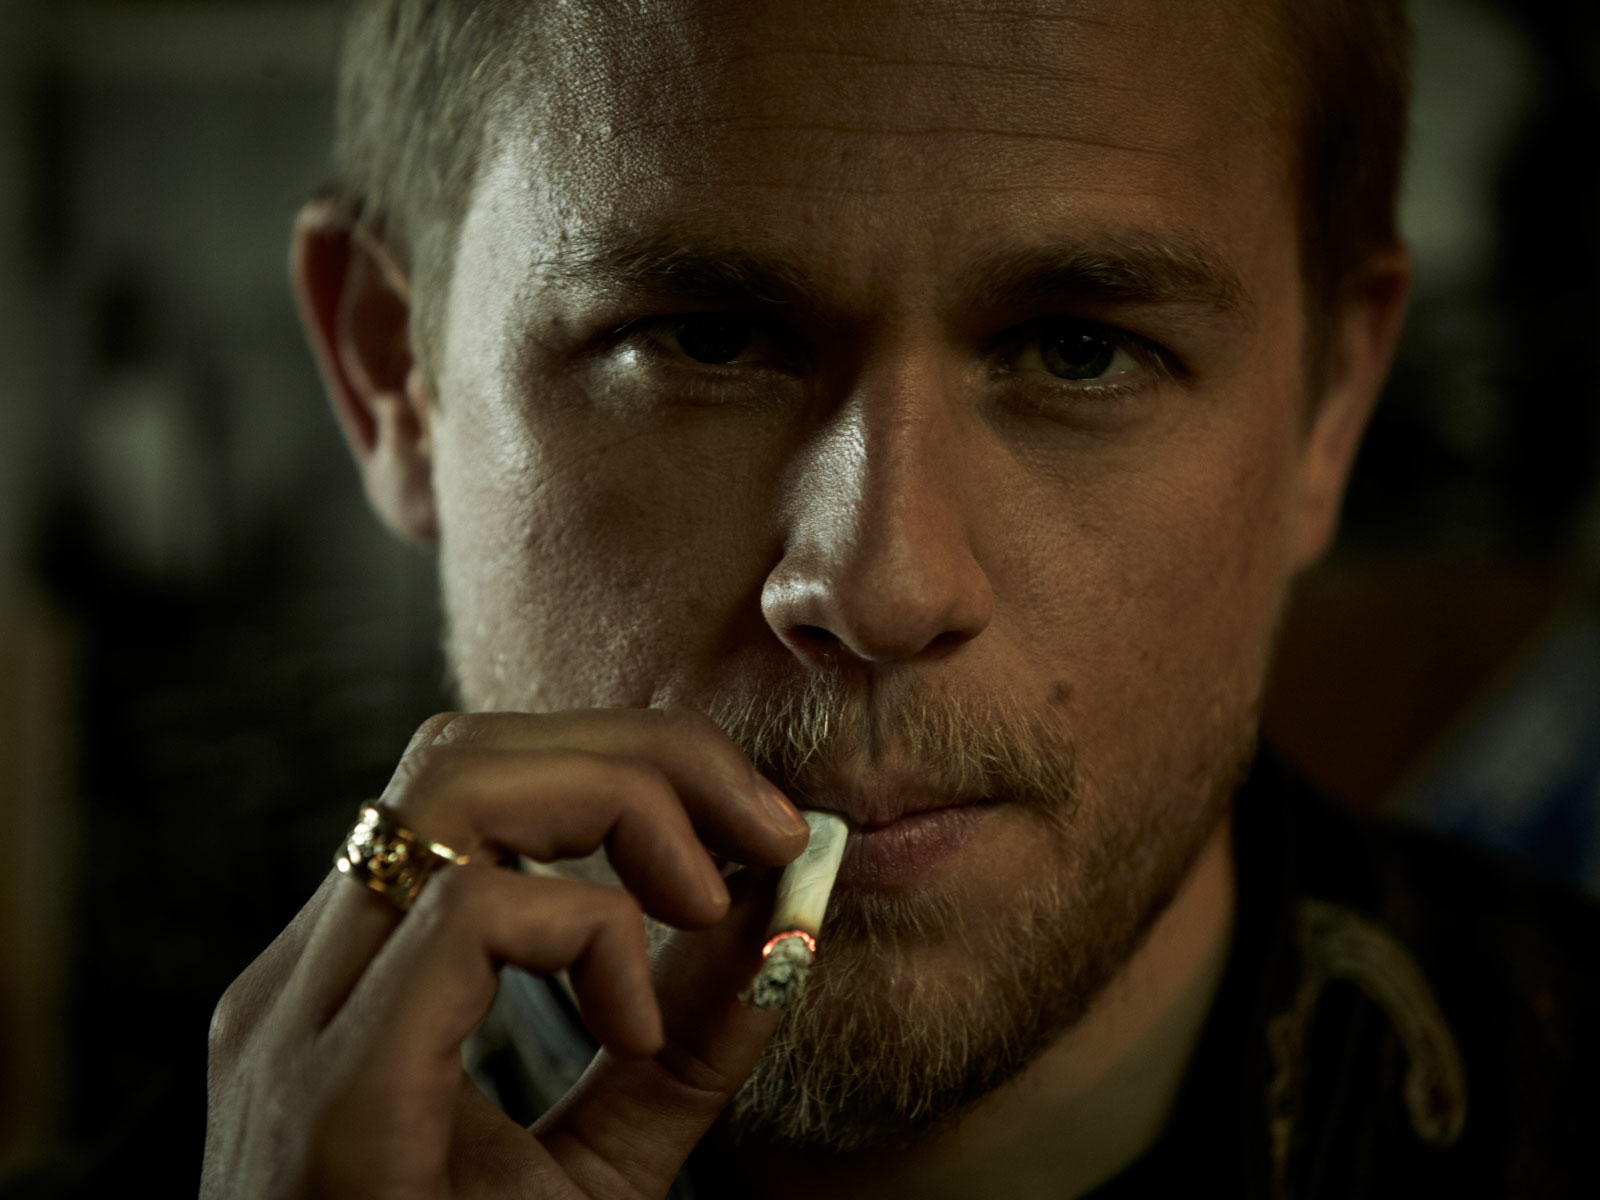 charlie hunnam wallpaper,smoking,tobacco products,nose,cigarette,human